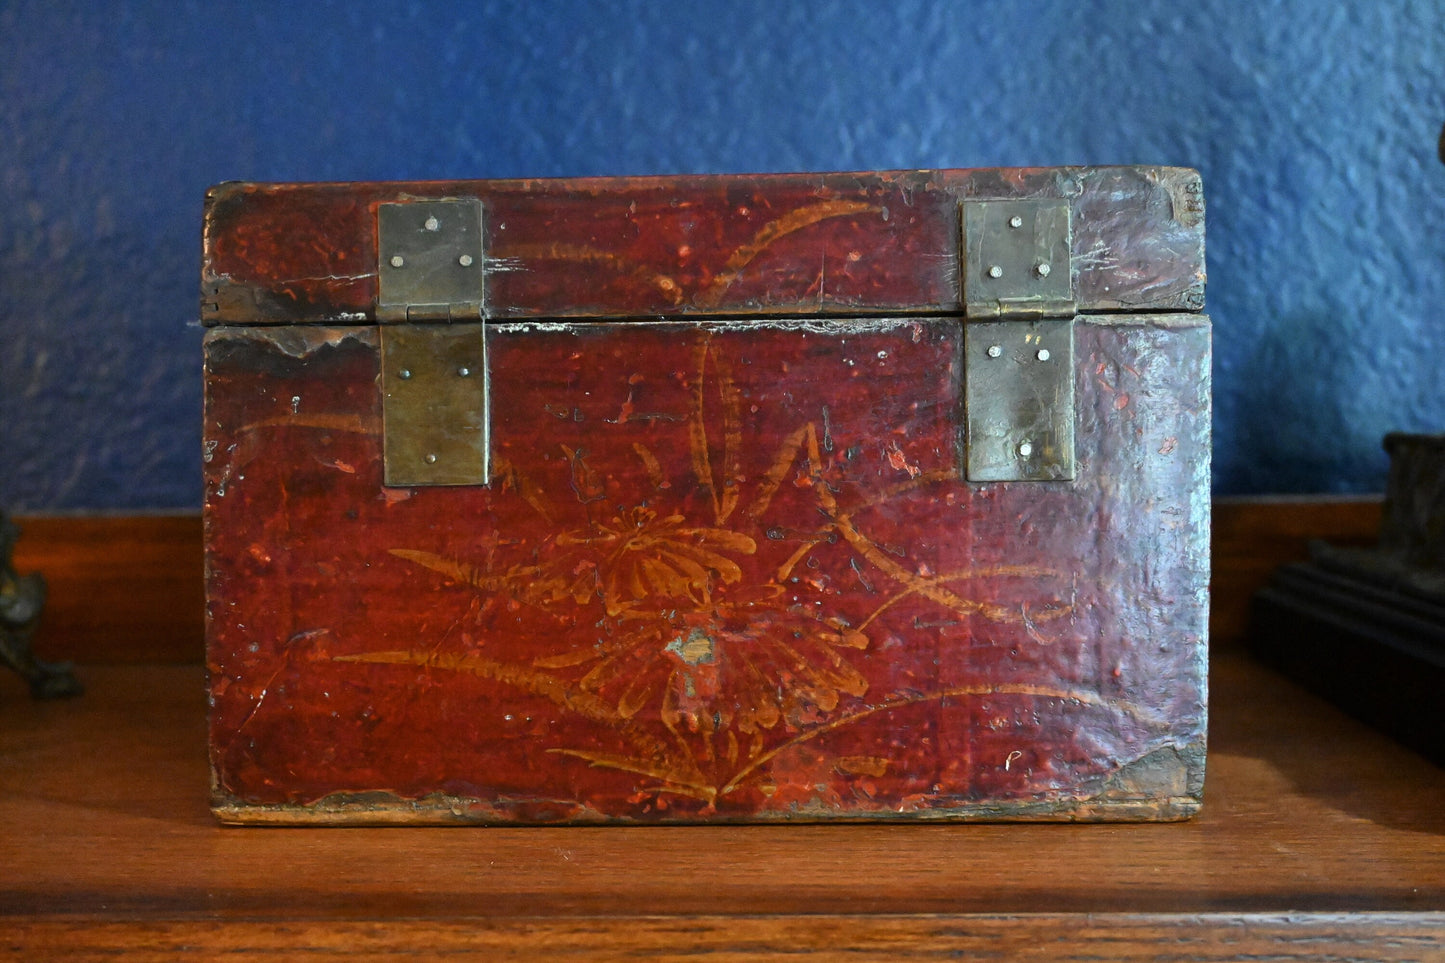 Stunning Antique Chinese Red & Gold Lacquer Wooden Box Hand-Painted Qing Dynasty circa 1875-1908